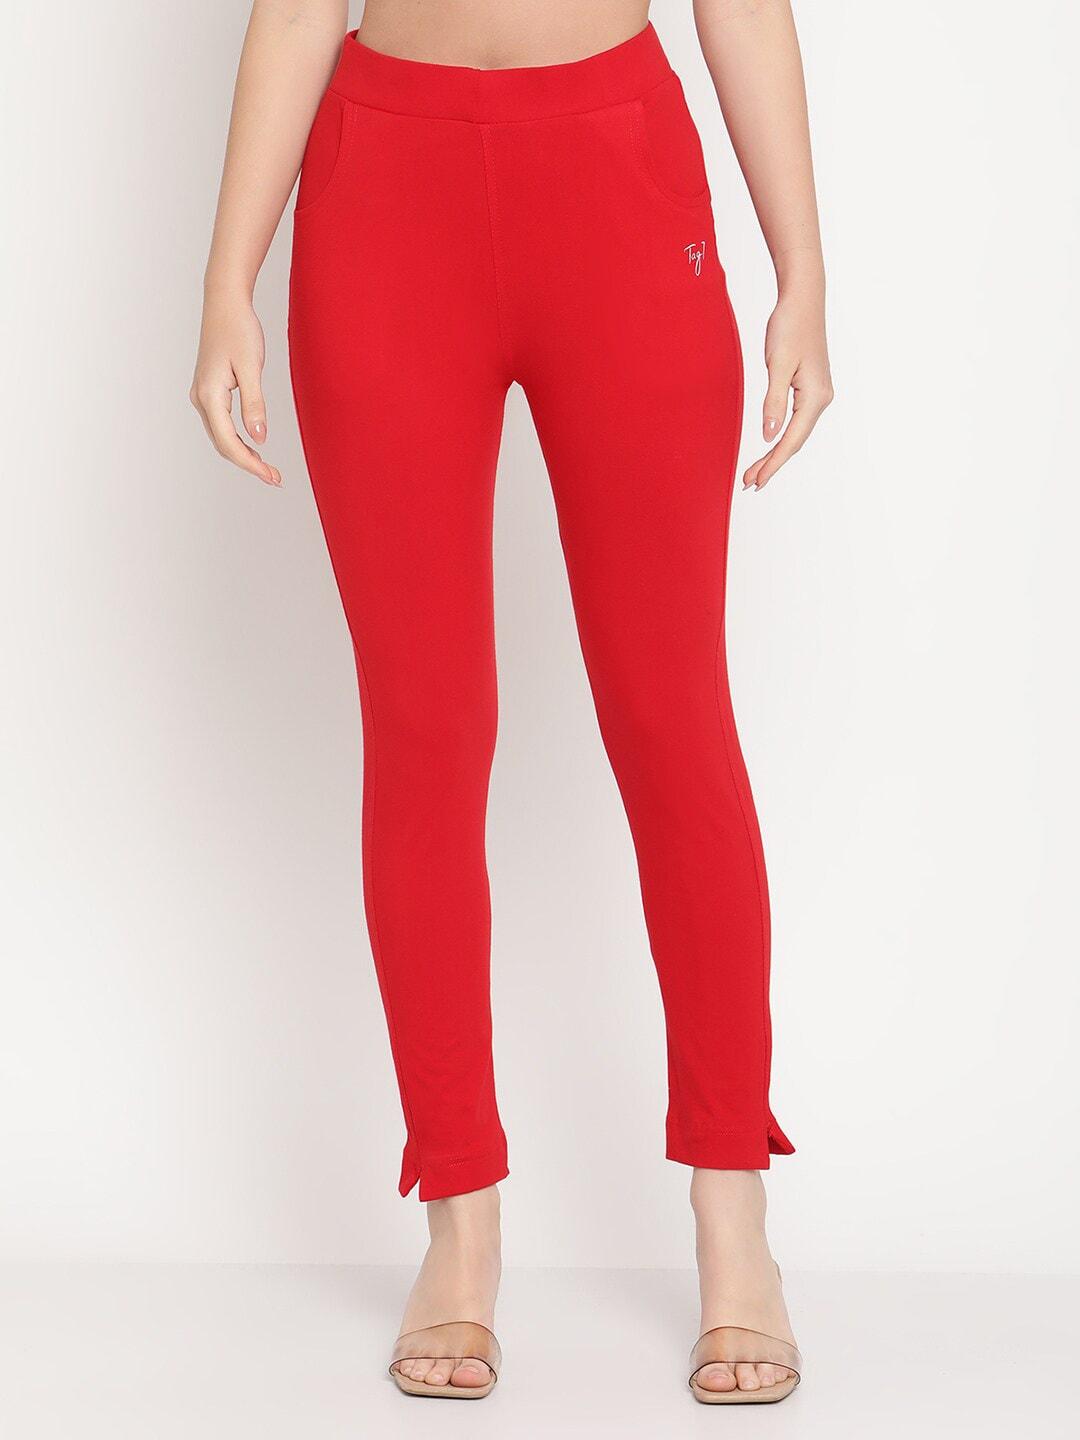 tag-7-women-red-solid-ankle-length-jeggings